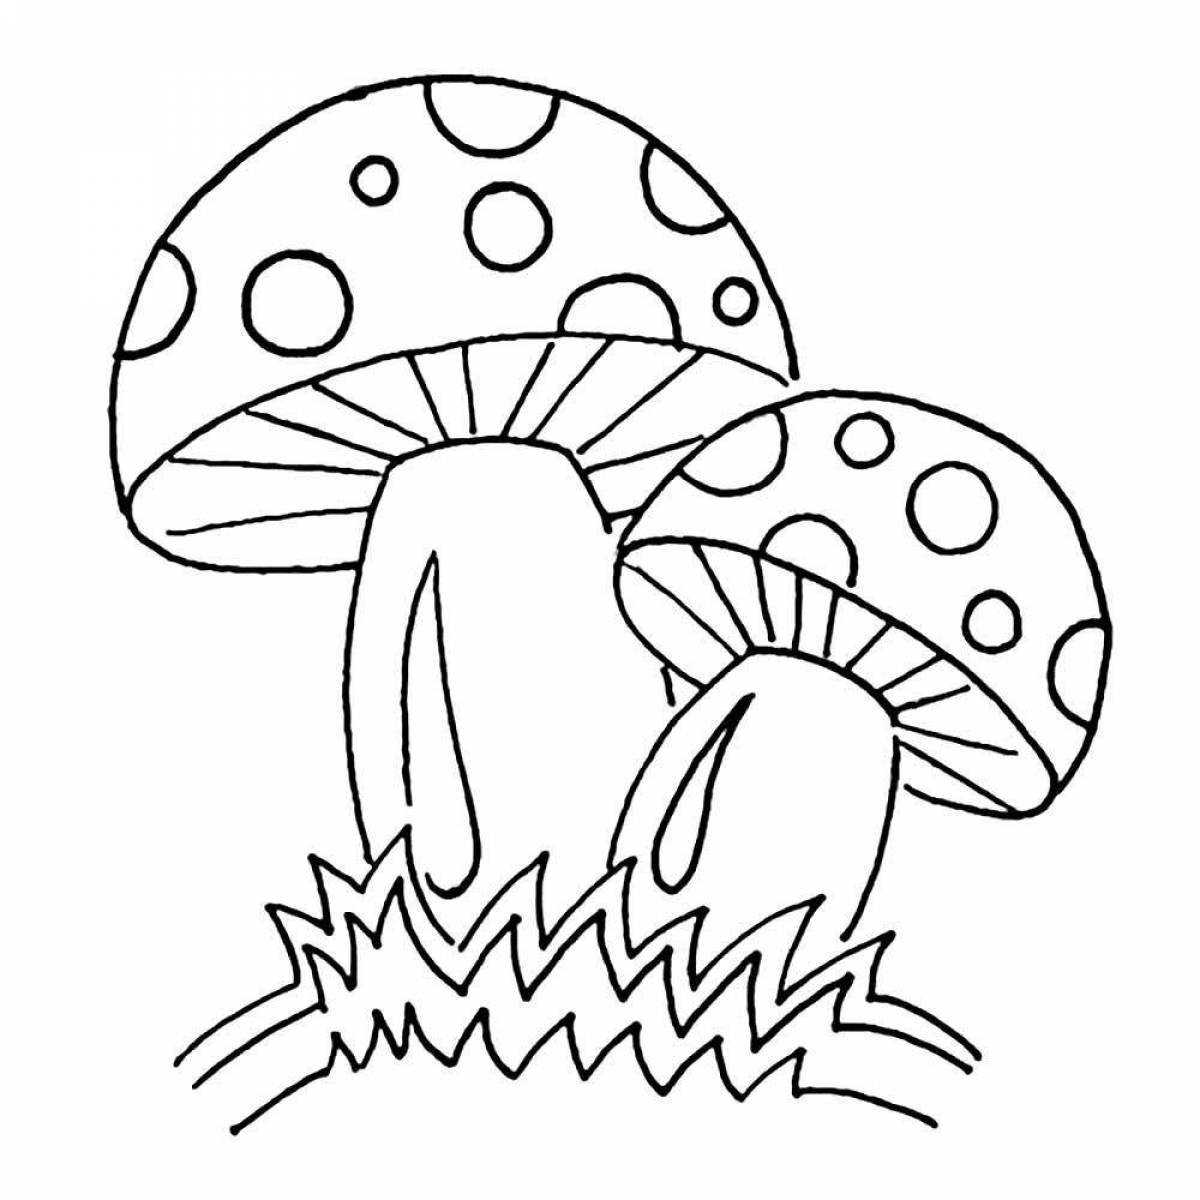 Fantastic coloring of fly agarics for children